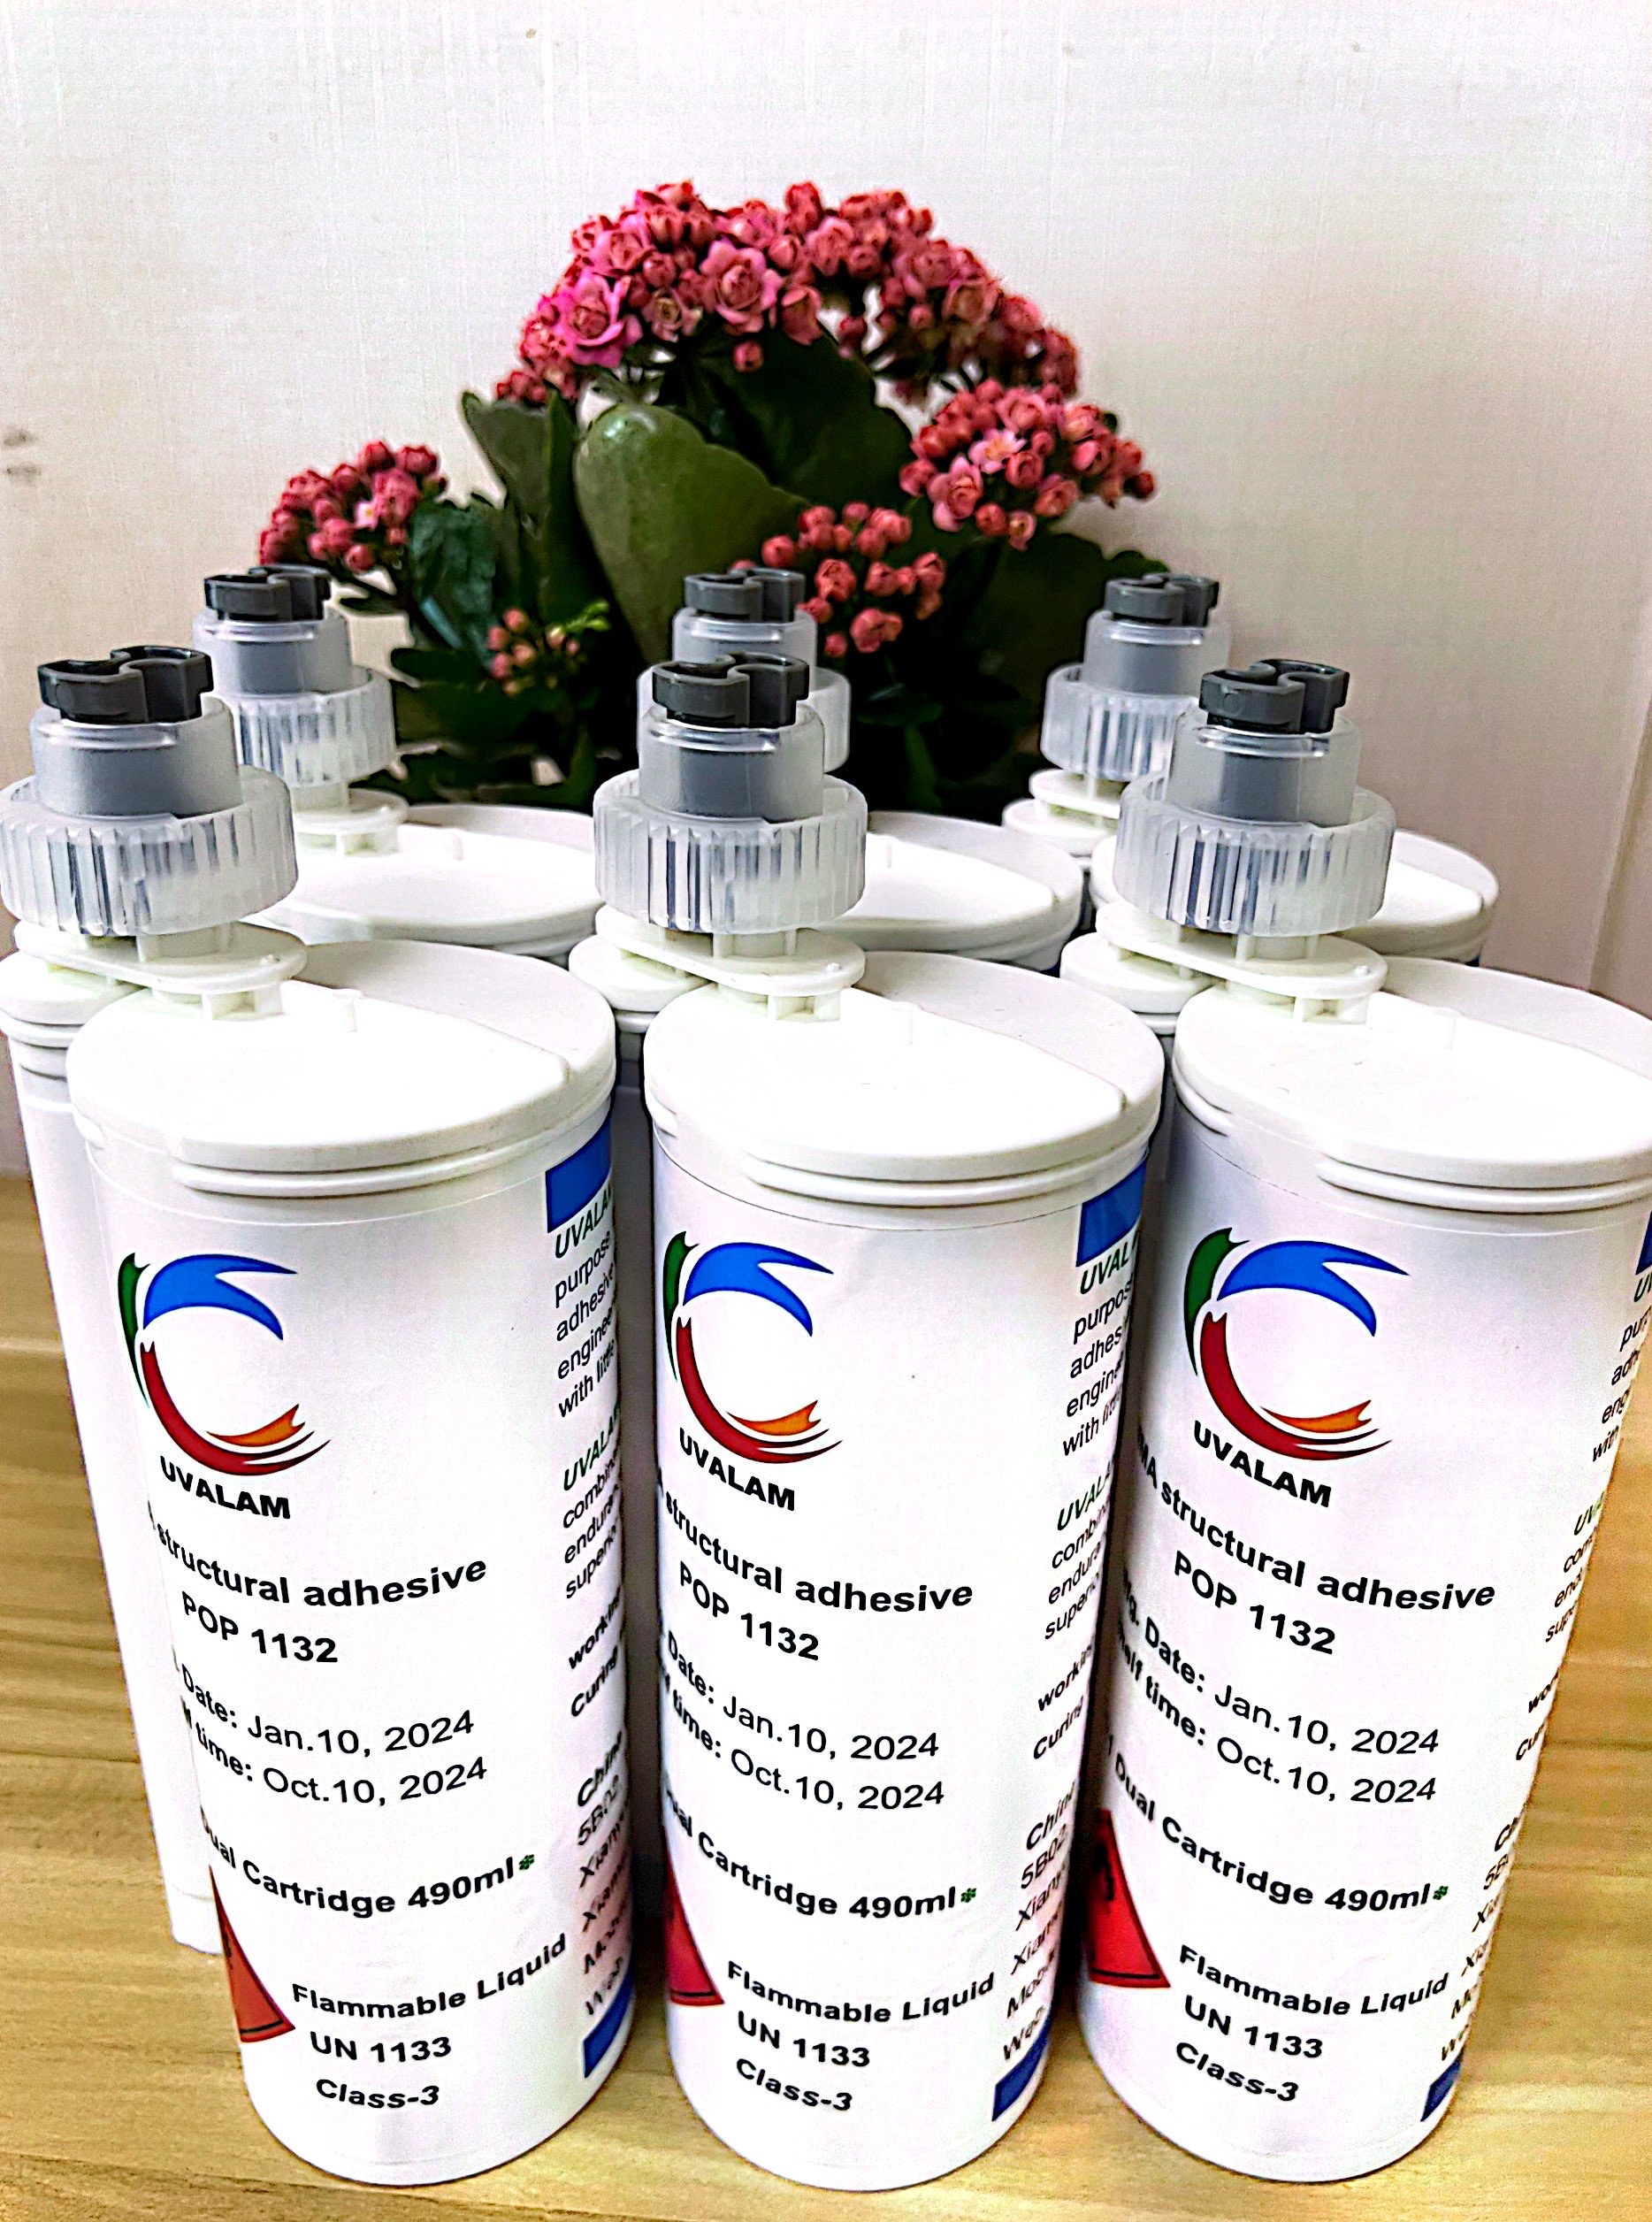 POP-1132 MMA structural adhesive